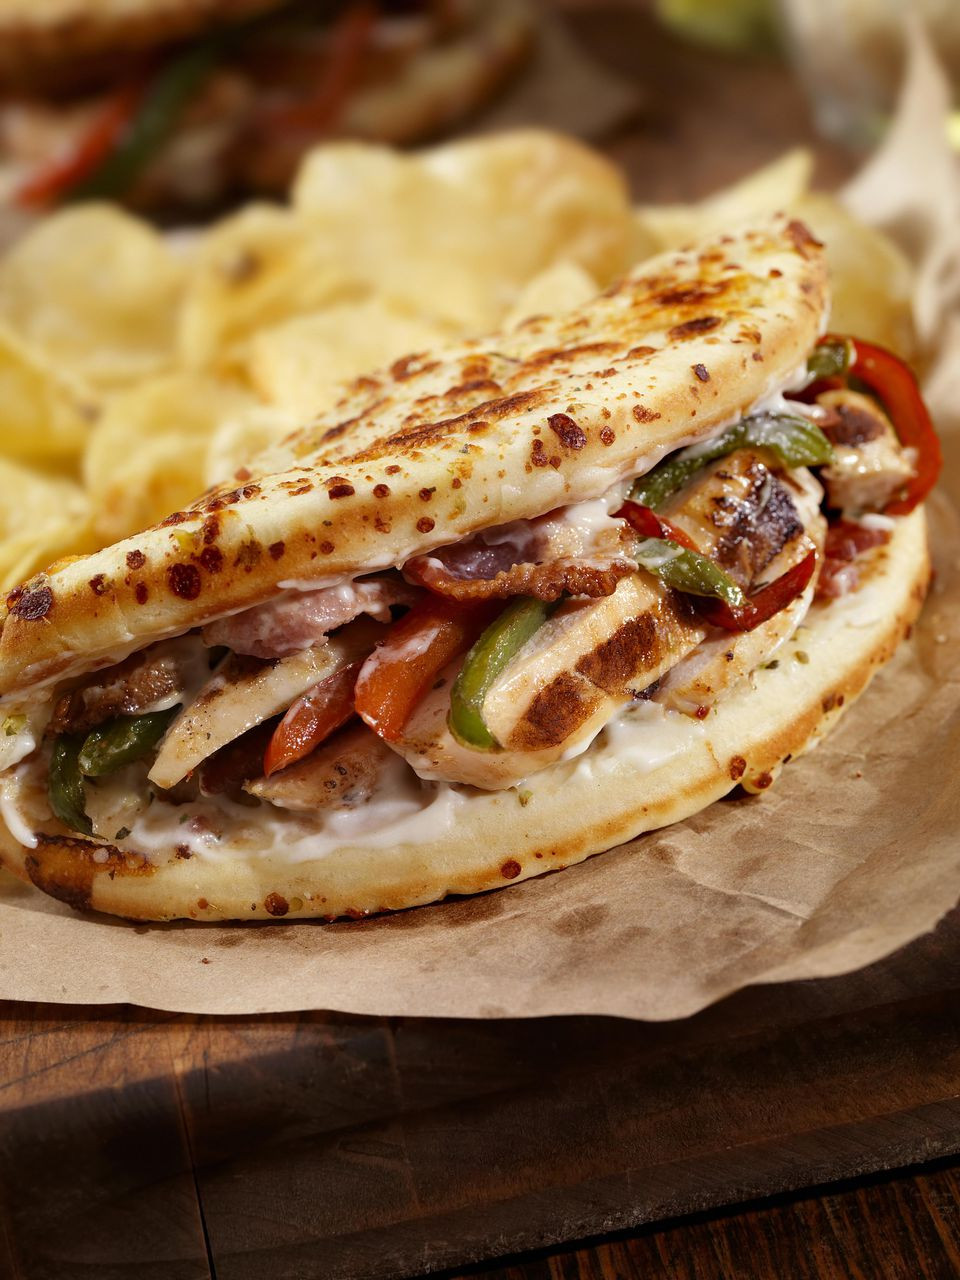 Chicken Breast Sandwiches Recipe
 Chicken Breast Sandwiches with Roasted Peppers Recipe